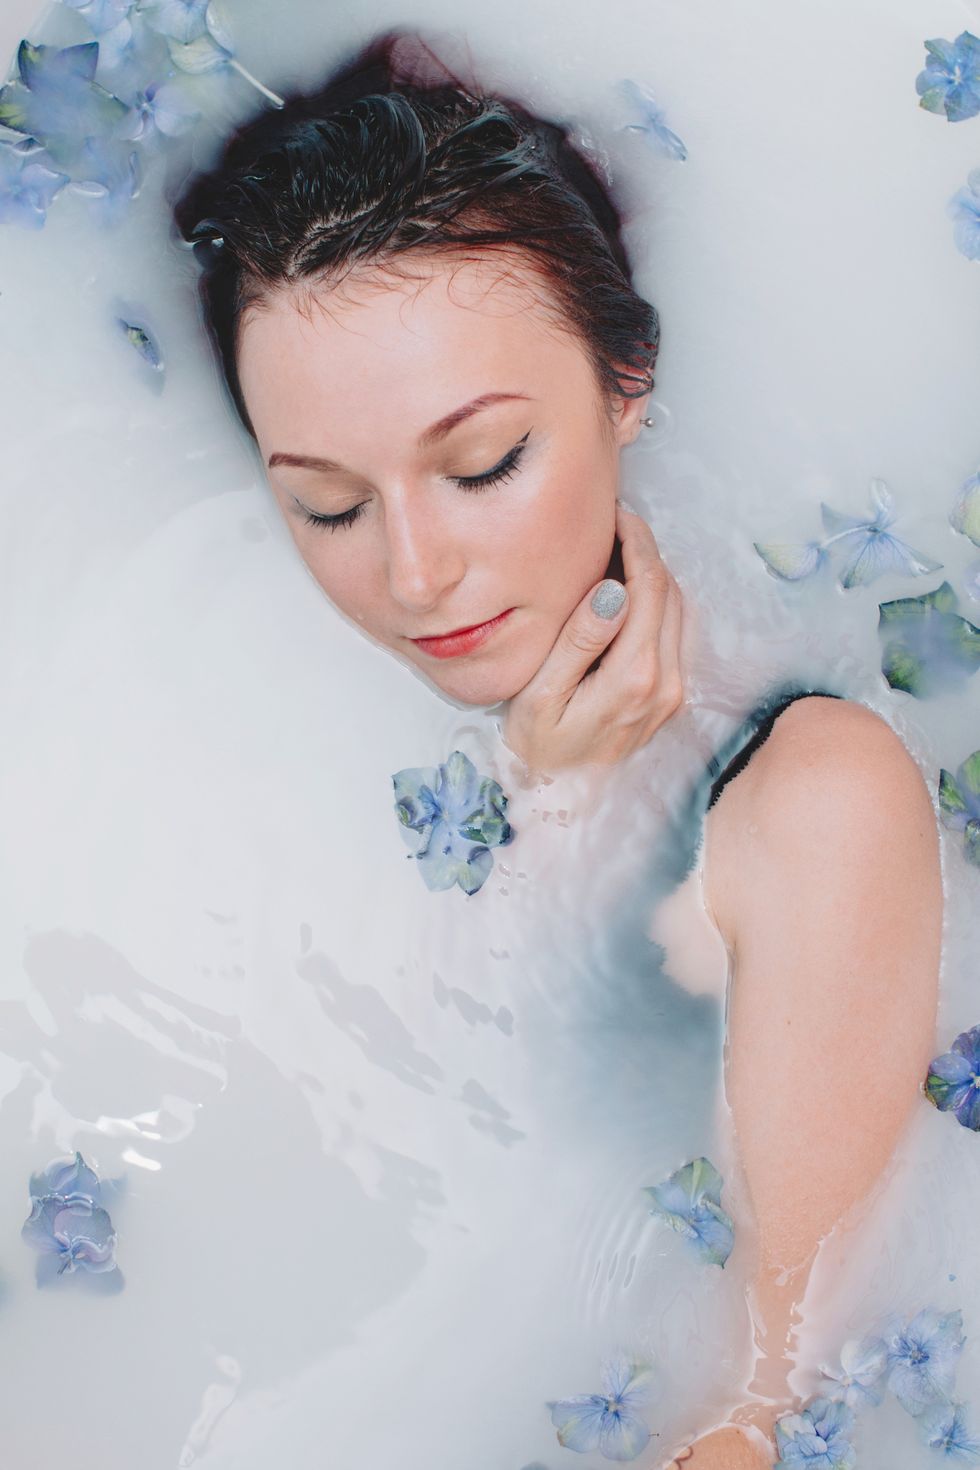 Woman lying in a milky bath with flowers